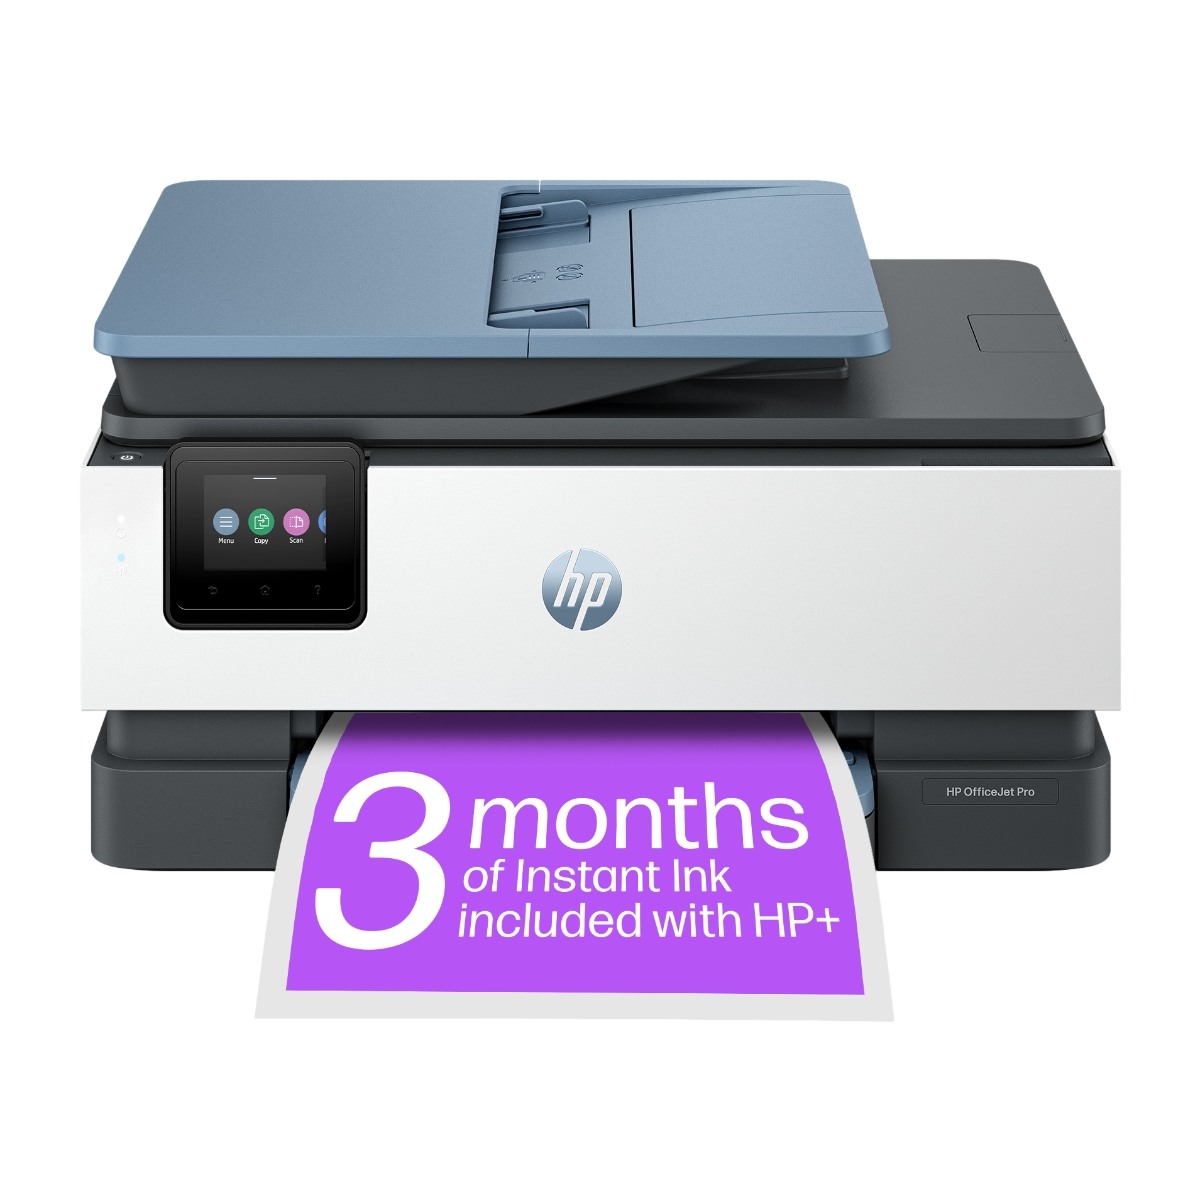 HP OfficeJet Pro 8125E All-In -One printer